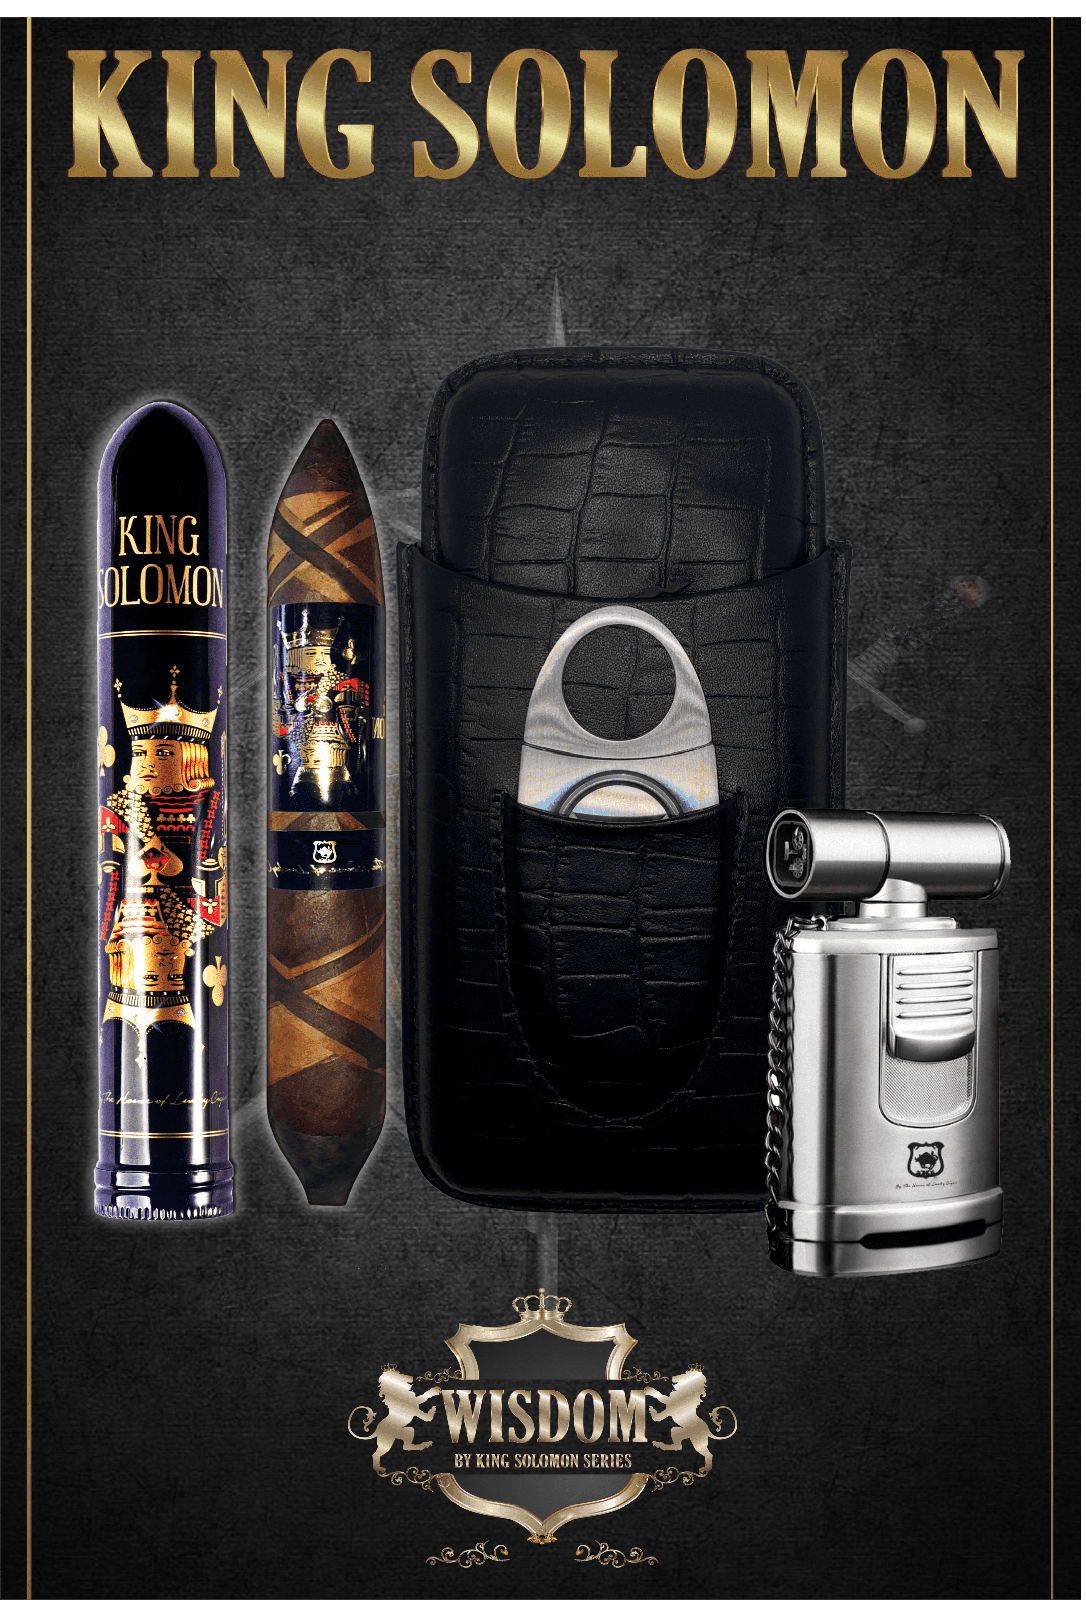 From The King Solomon Series: 1 Solomon 7x60 Cigars with Travel Humidor, Cutter, Gun Torch Set